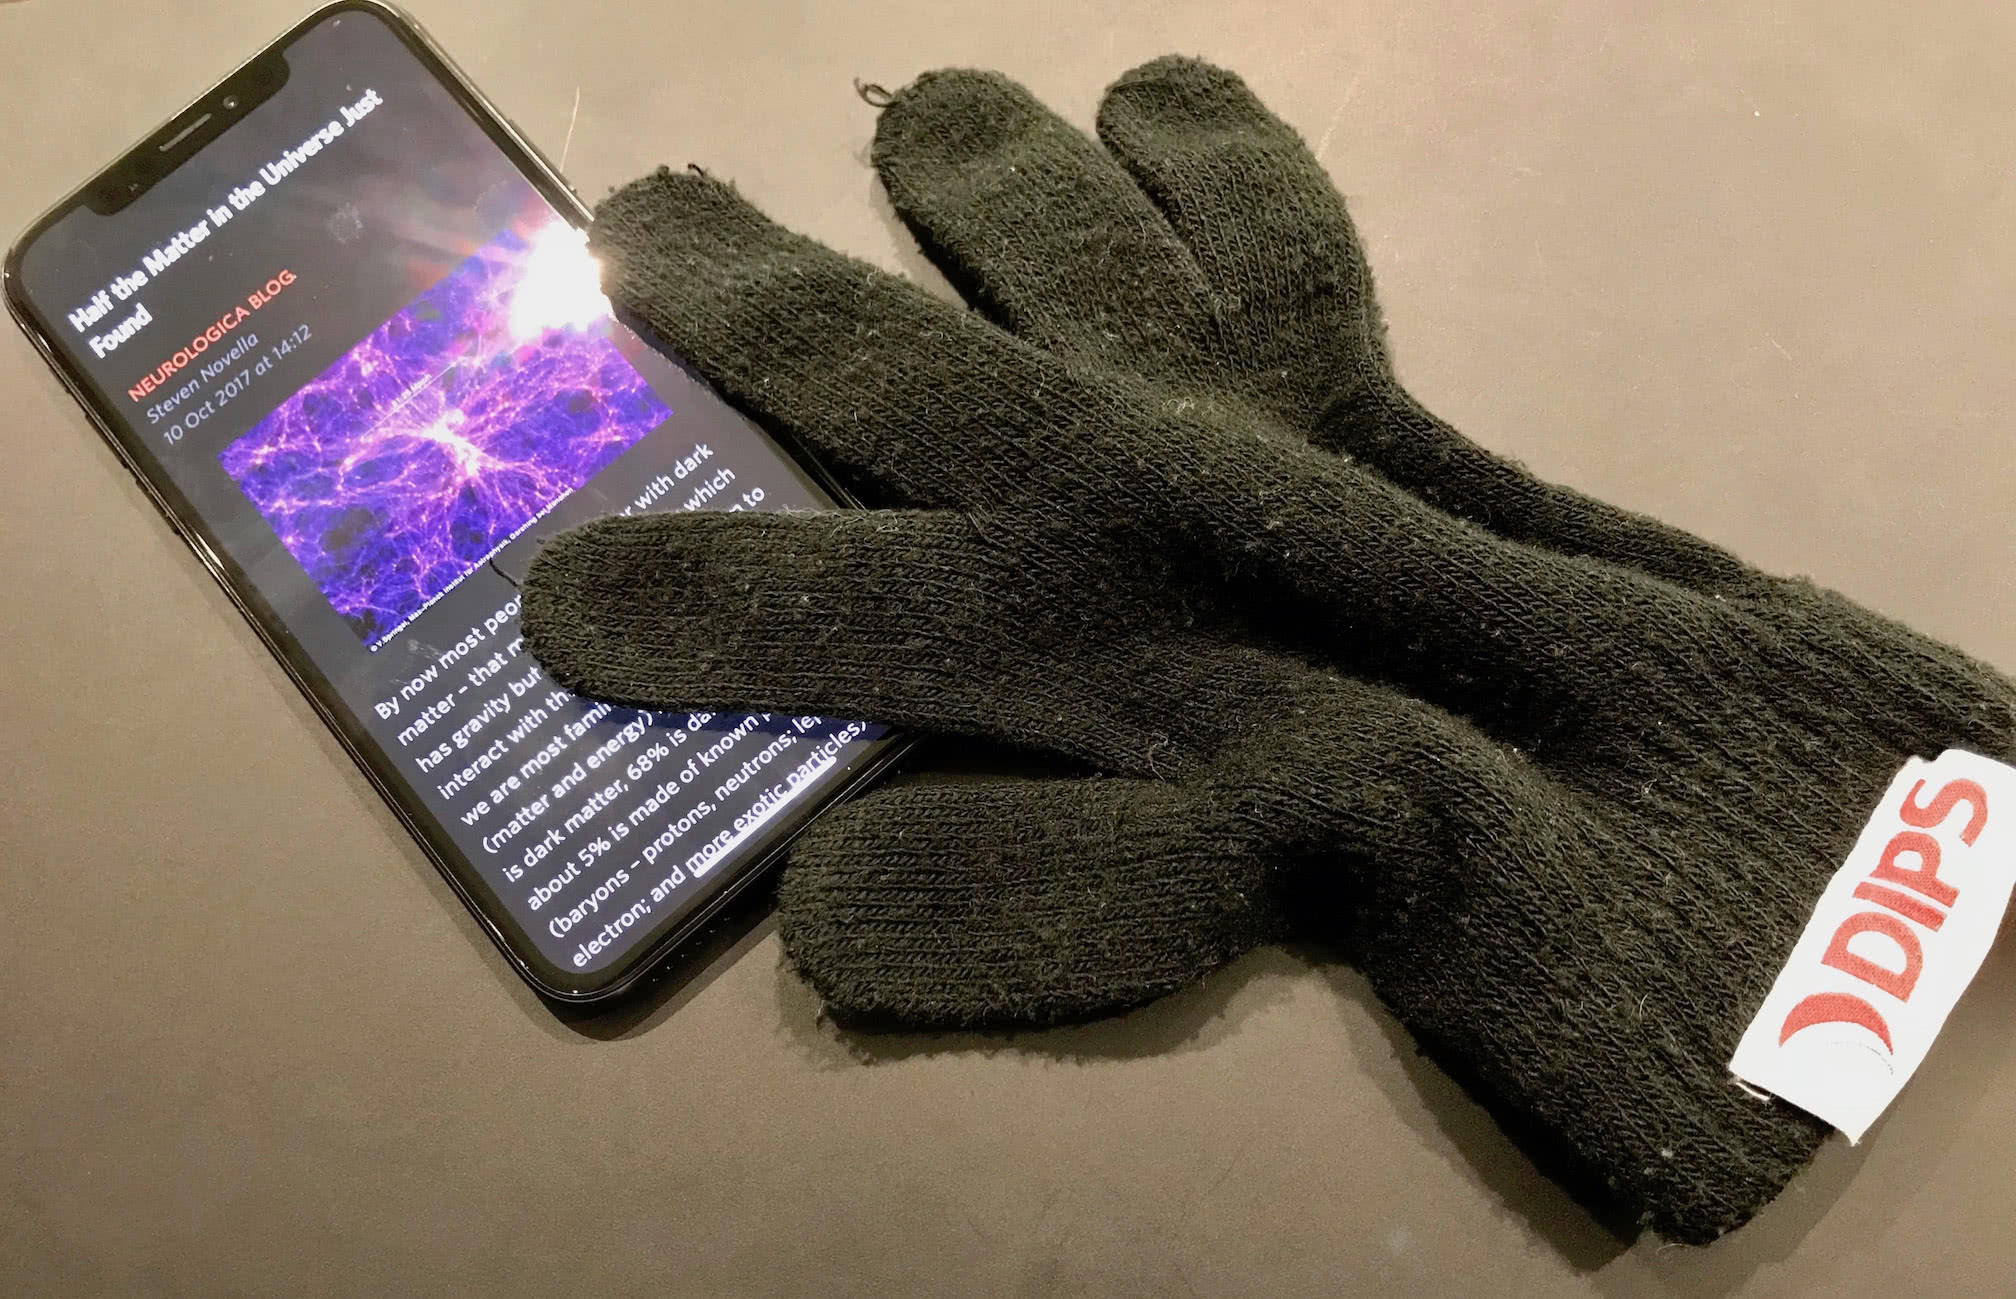 Even with awesome touch enabled gloves, DIPS edition, iPhone X is amazing!